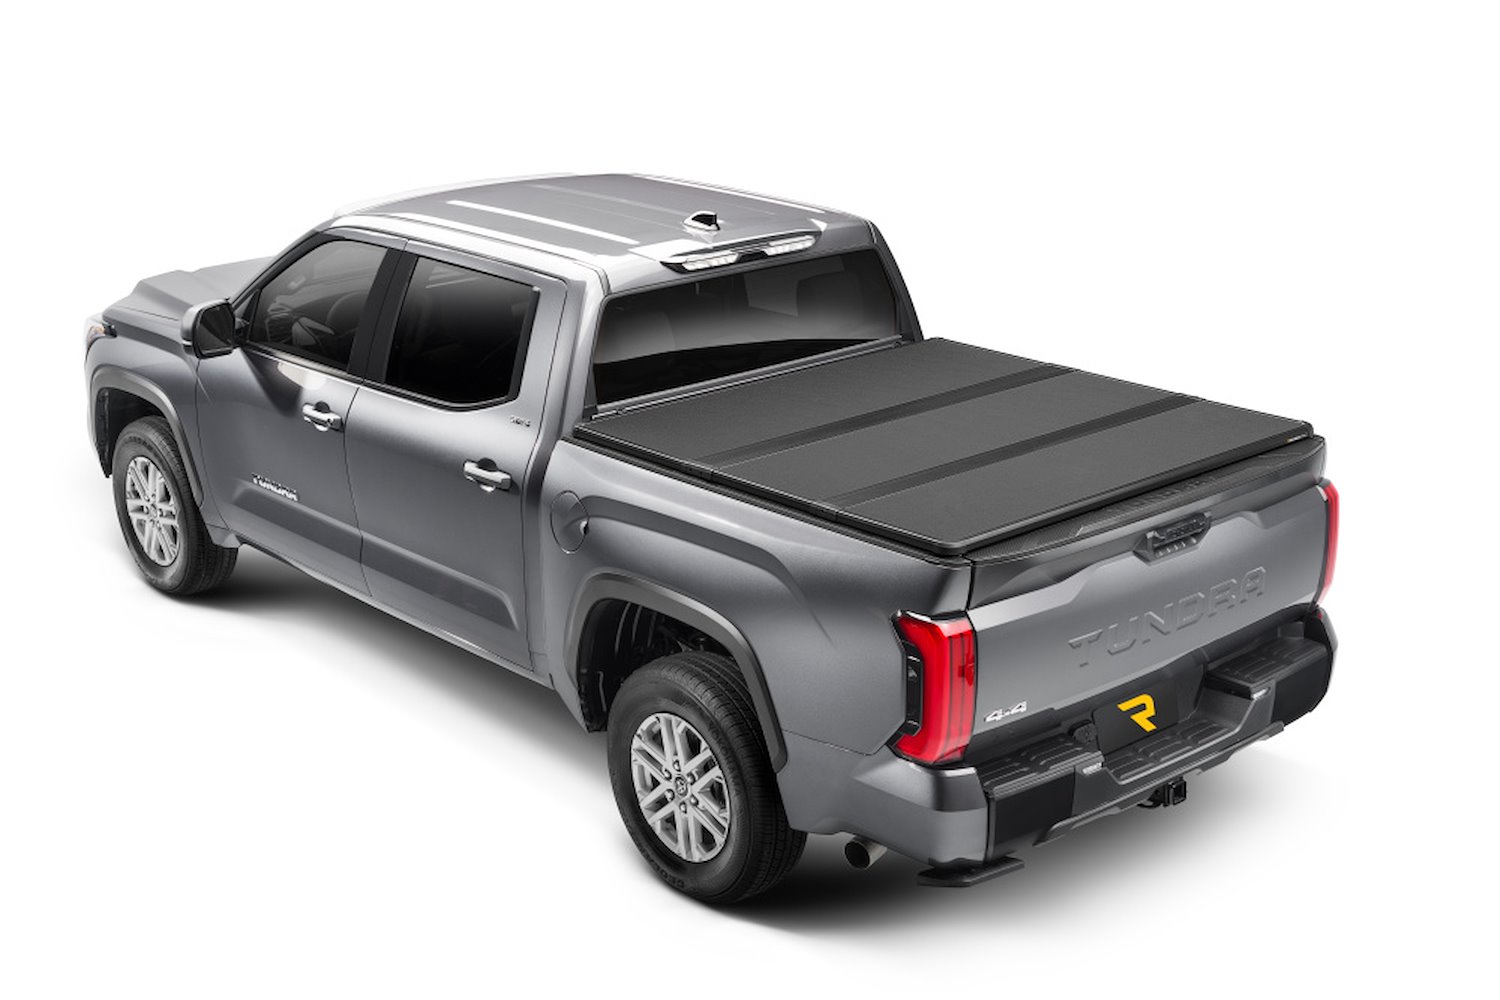 88466 Solid Fold ALX Tonneau Cover for 14-21 Tundra 6 ft.7 in. w/ Deck Rail System